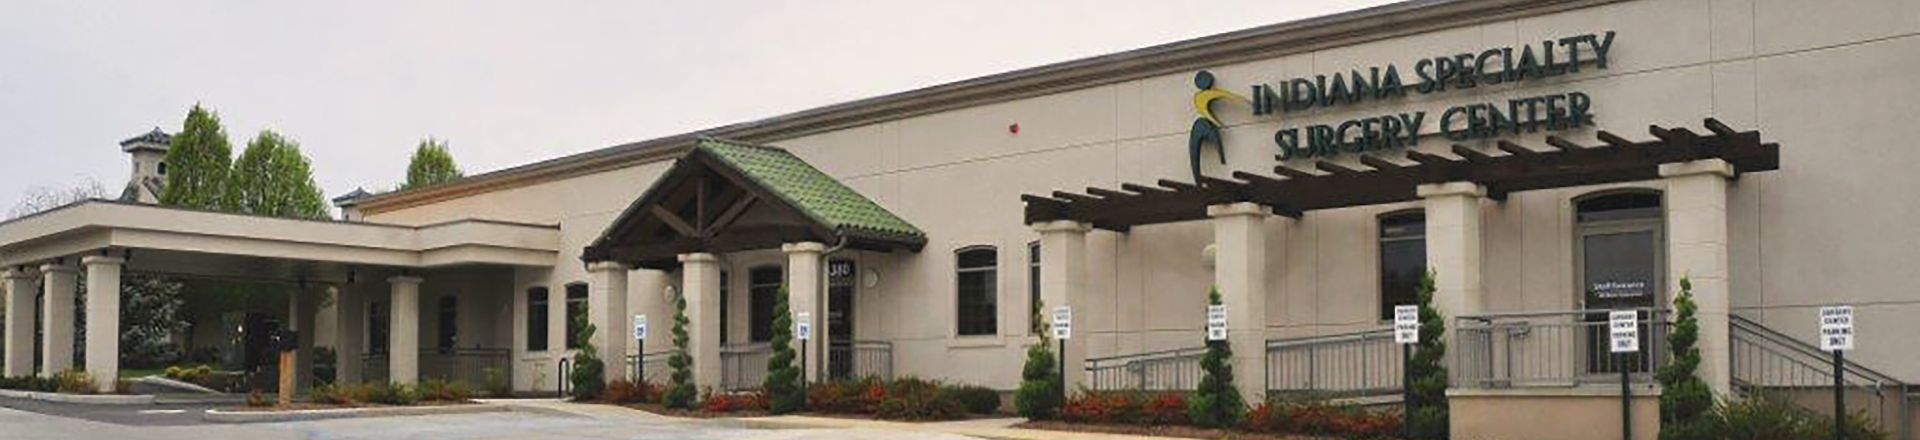 Indiana Specialty Surgery Center